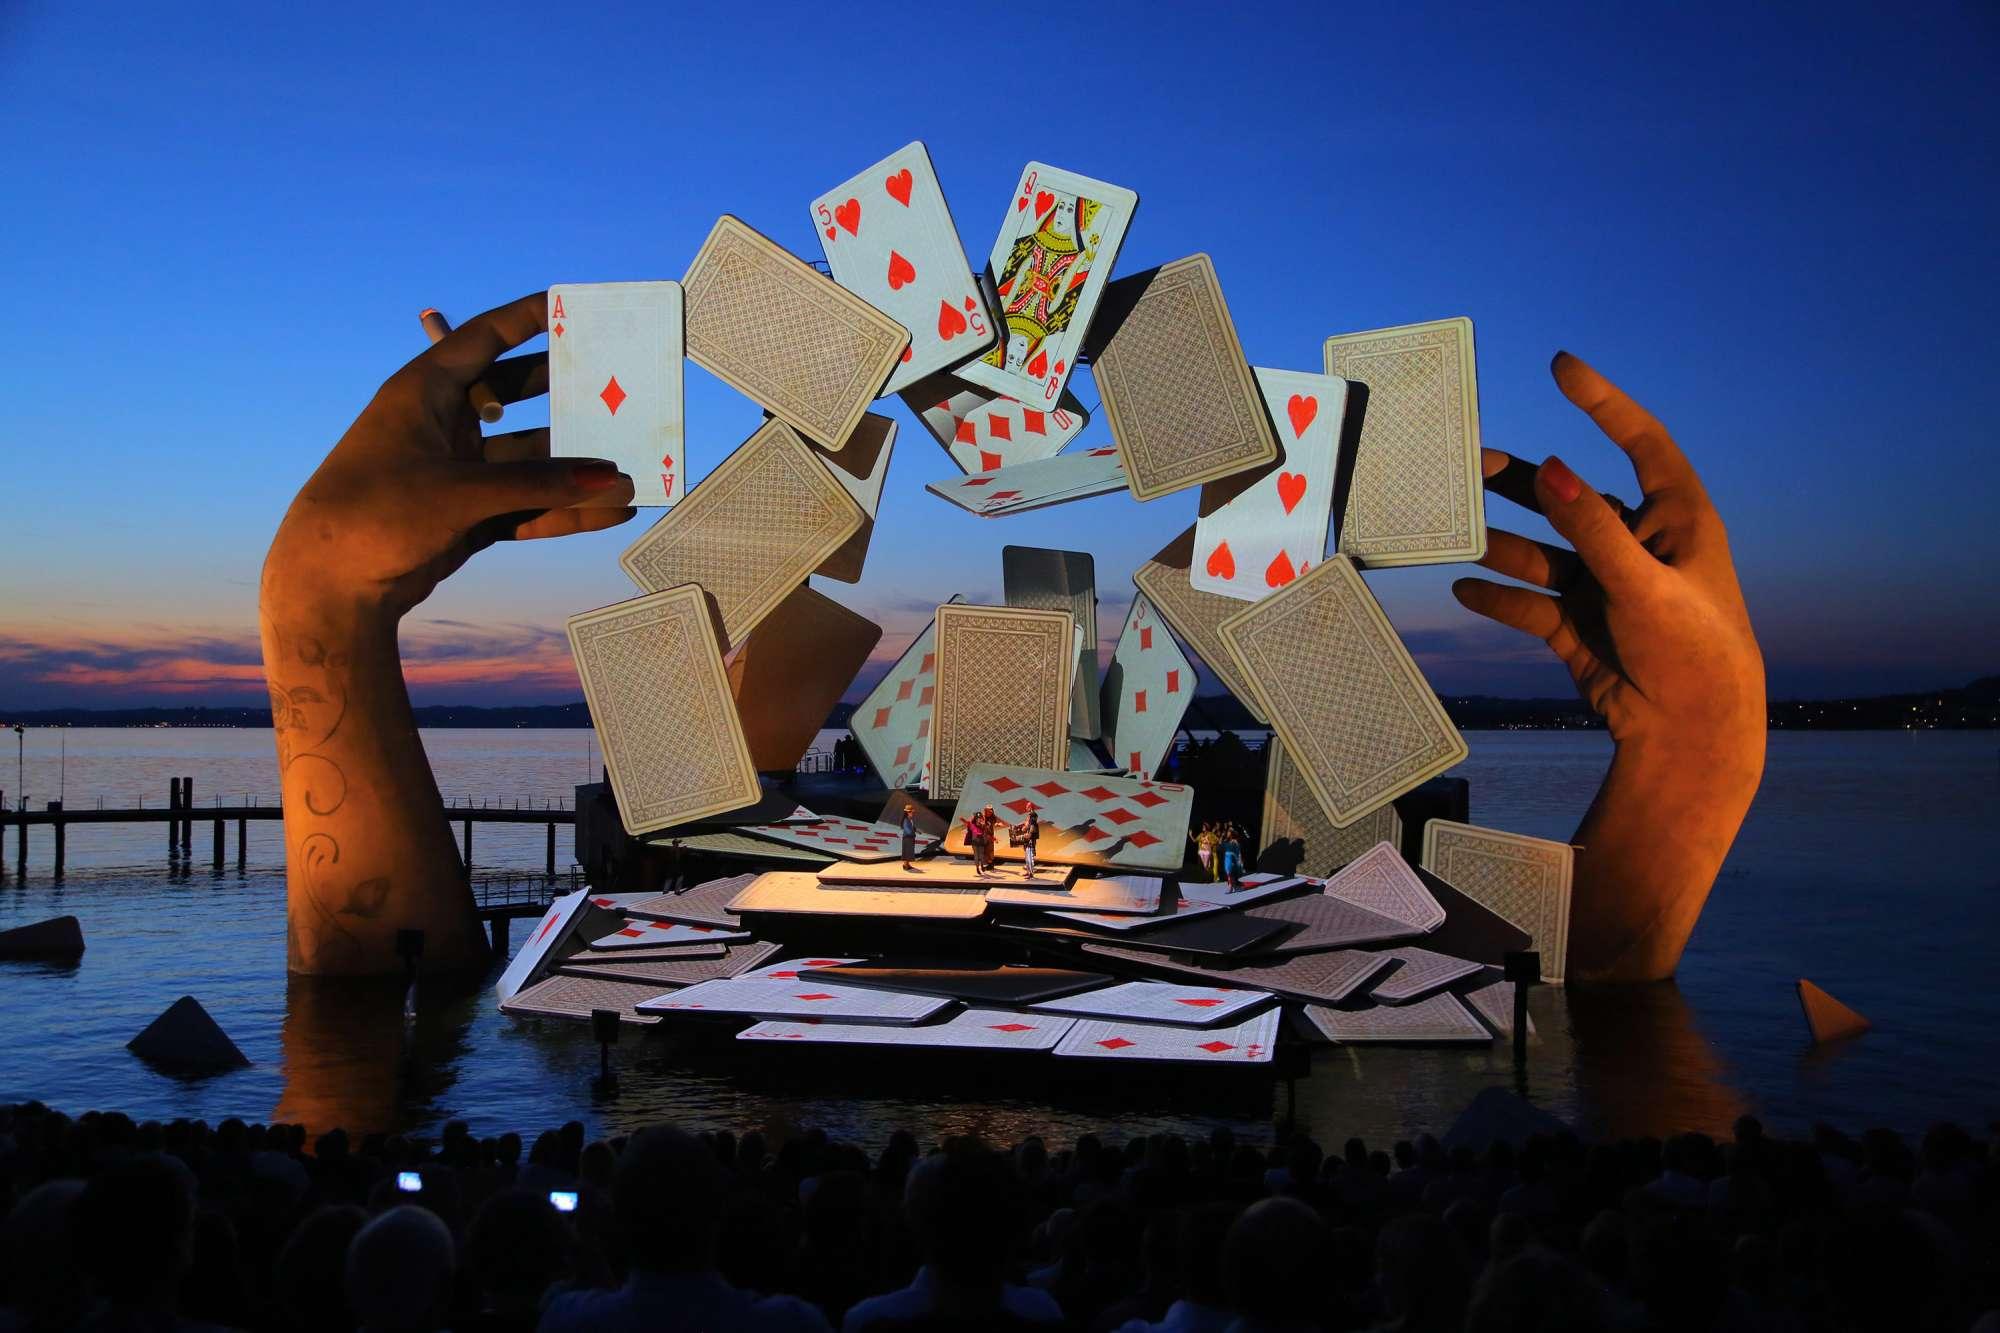 Scene from Es Devlin's Carmen set - playing card stage on river is flaked by large hands